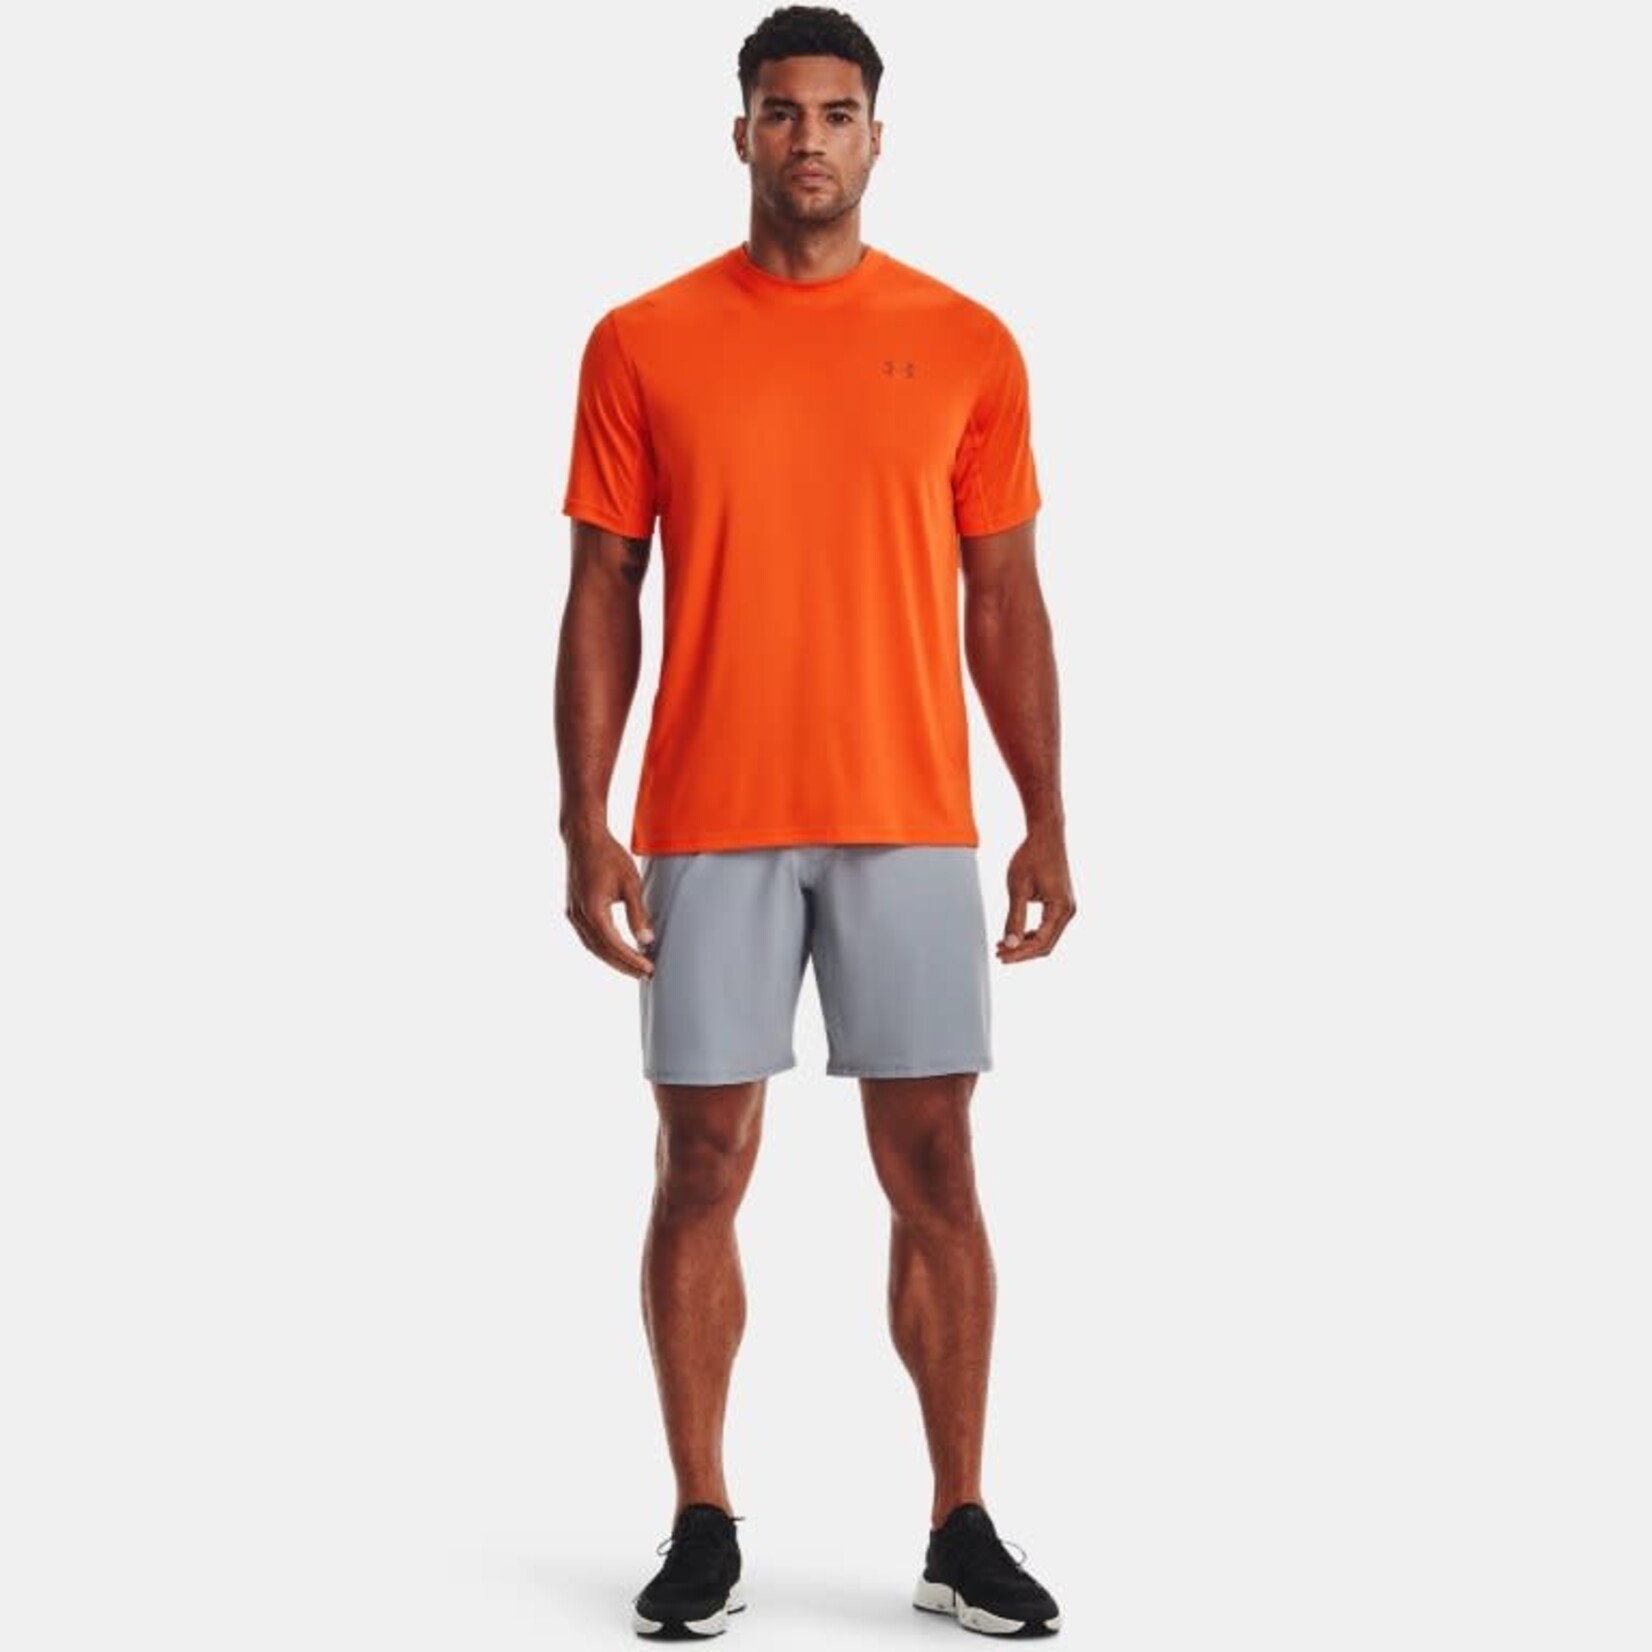 Under Armour Under Armour Board Shorts, Tide Chaser, Mens